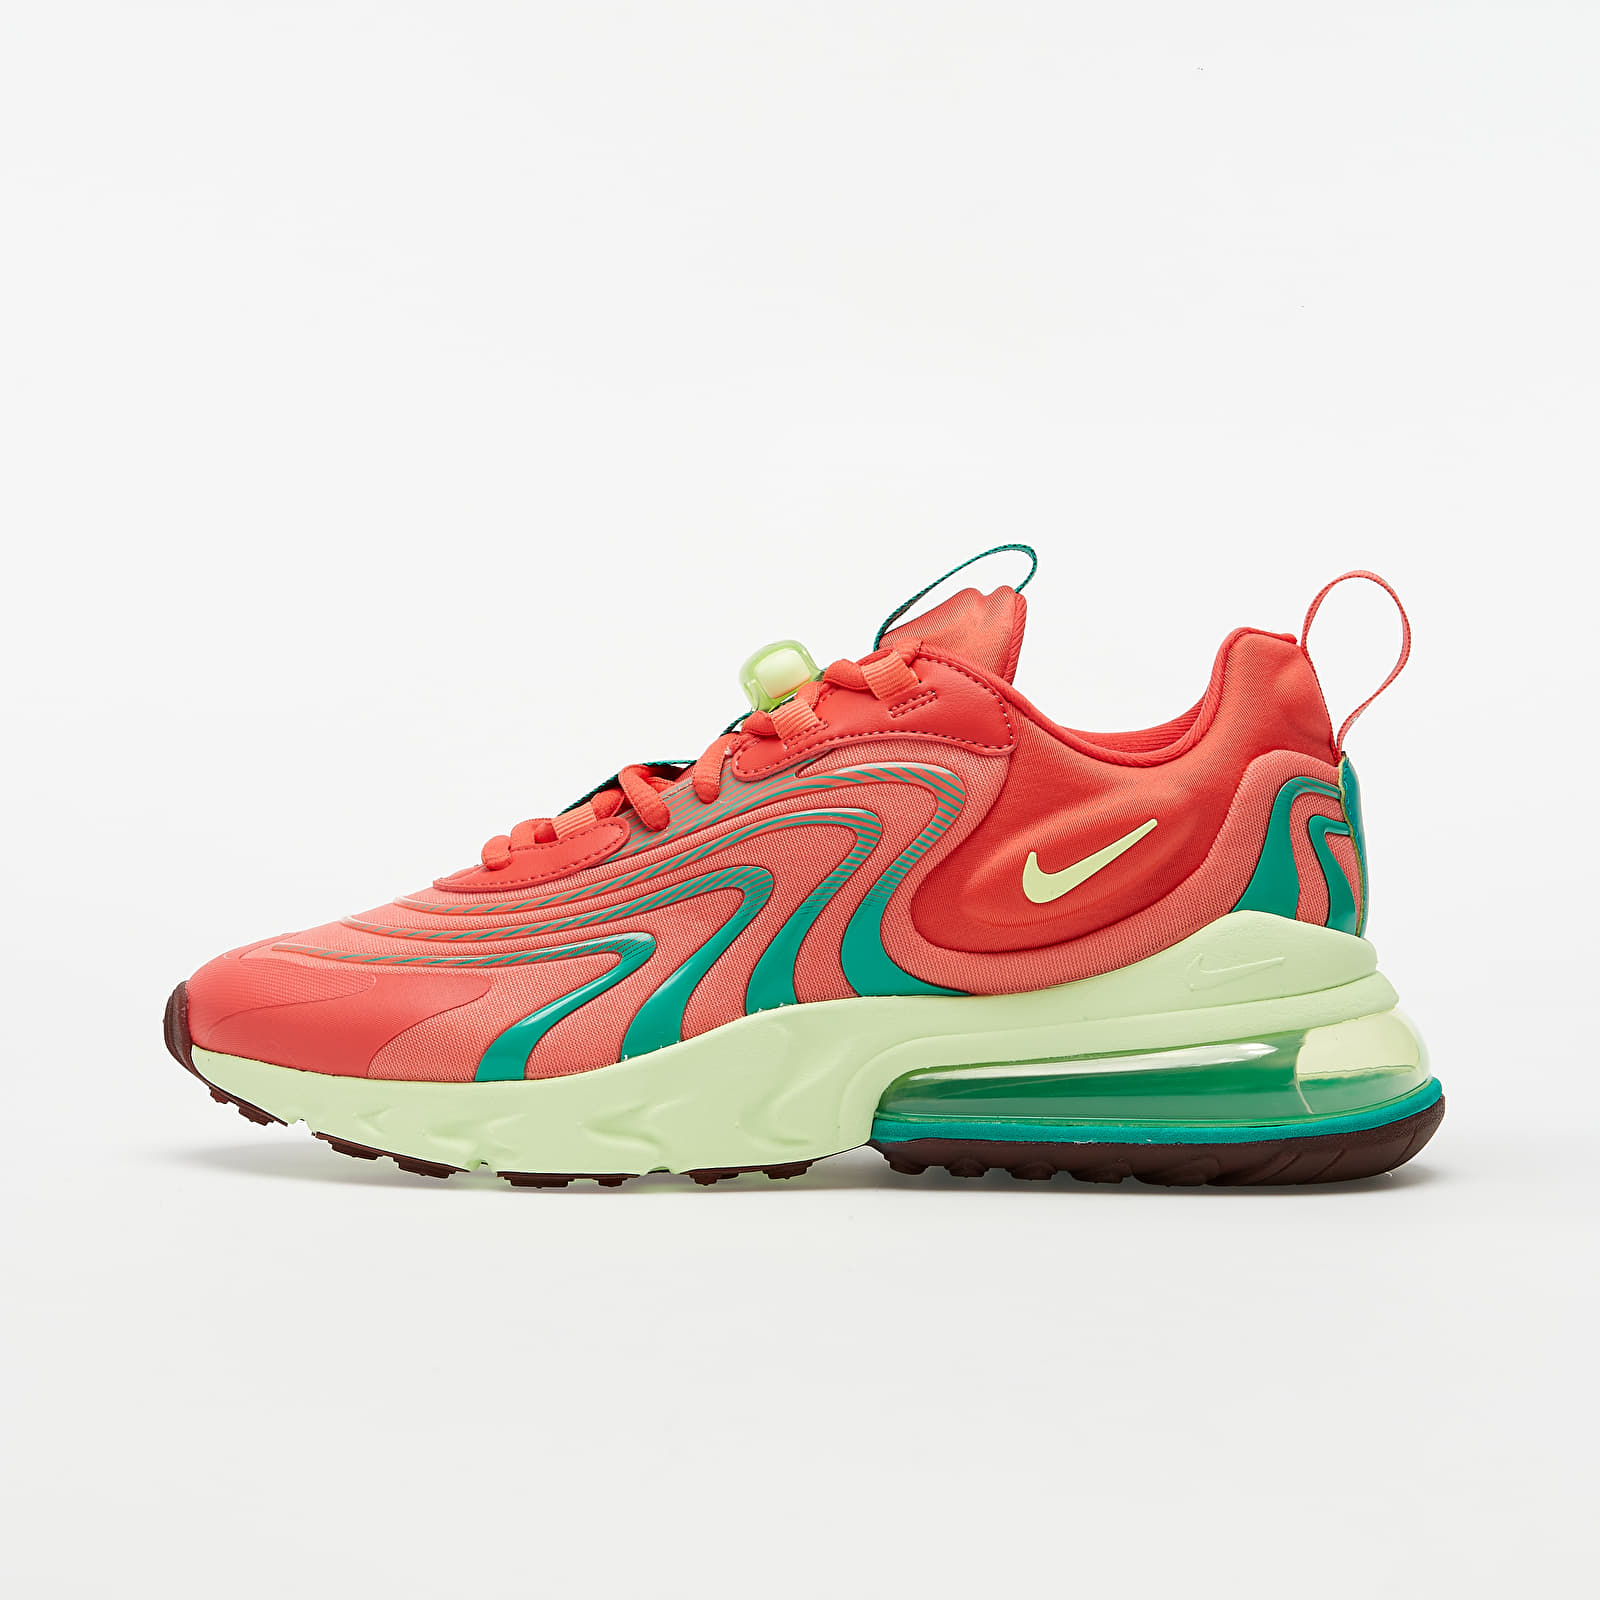 Nike Air Max 270 React ENG Track Red/ Barely Volt-Magic Ember CJ0579-600